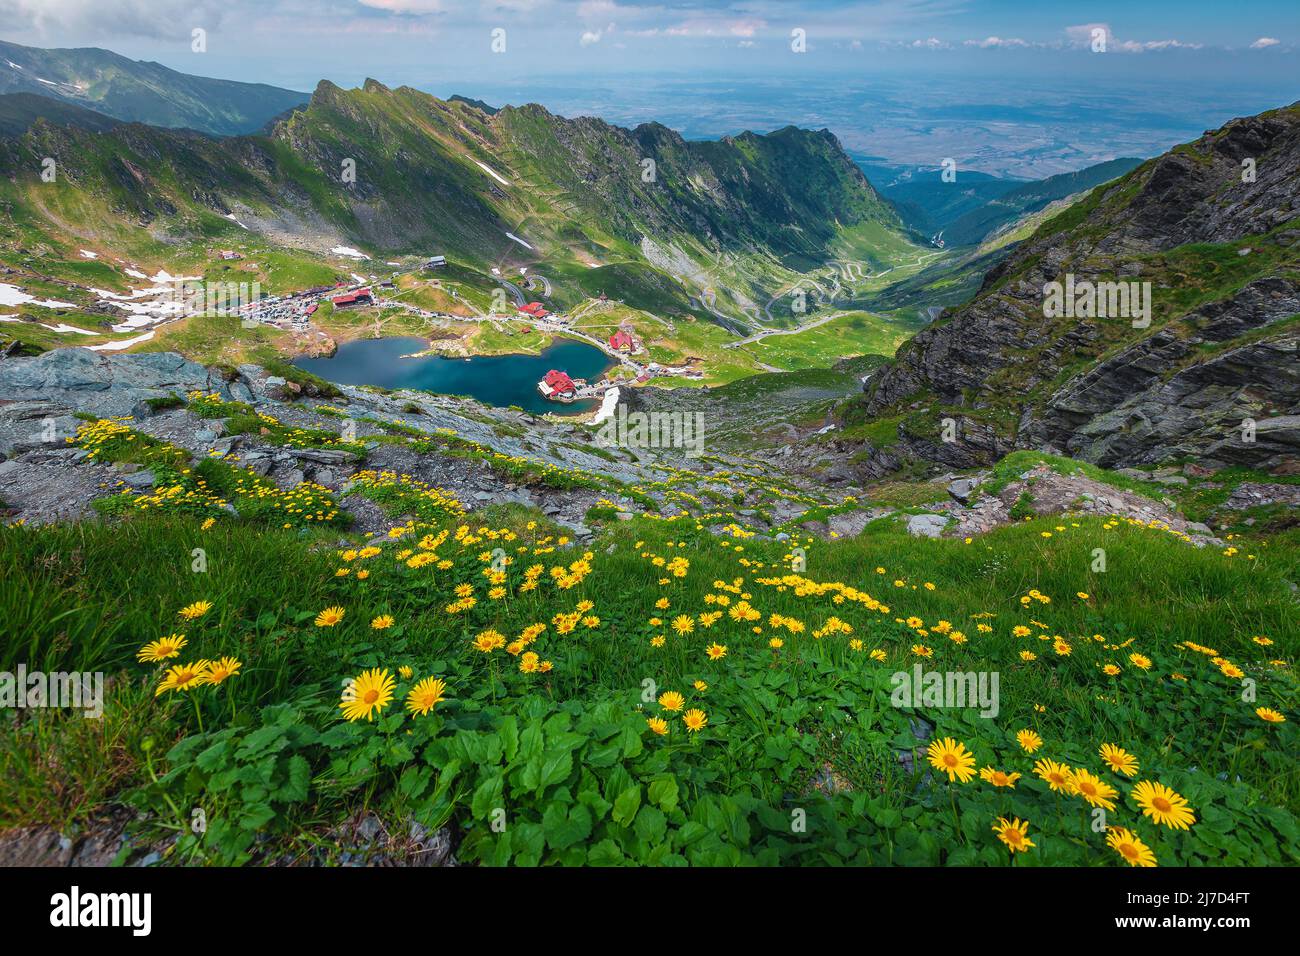 One of the most visited lake and hiking place in the Carpathians. Famous lake Balea and chalets on the shore of the lake, Fagaras mountains, Carpathia Stock Photo